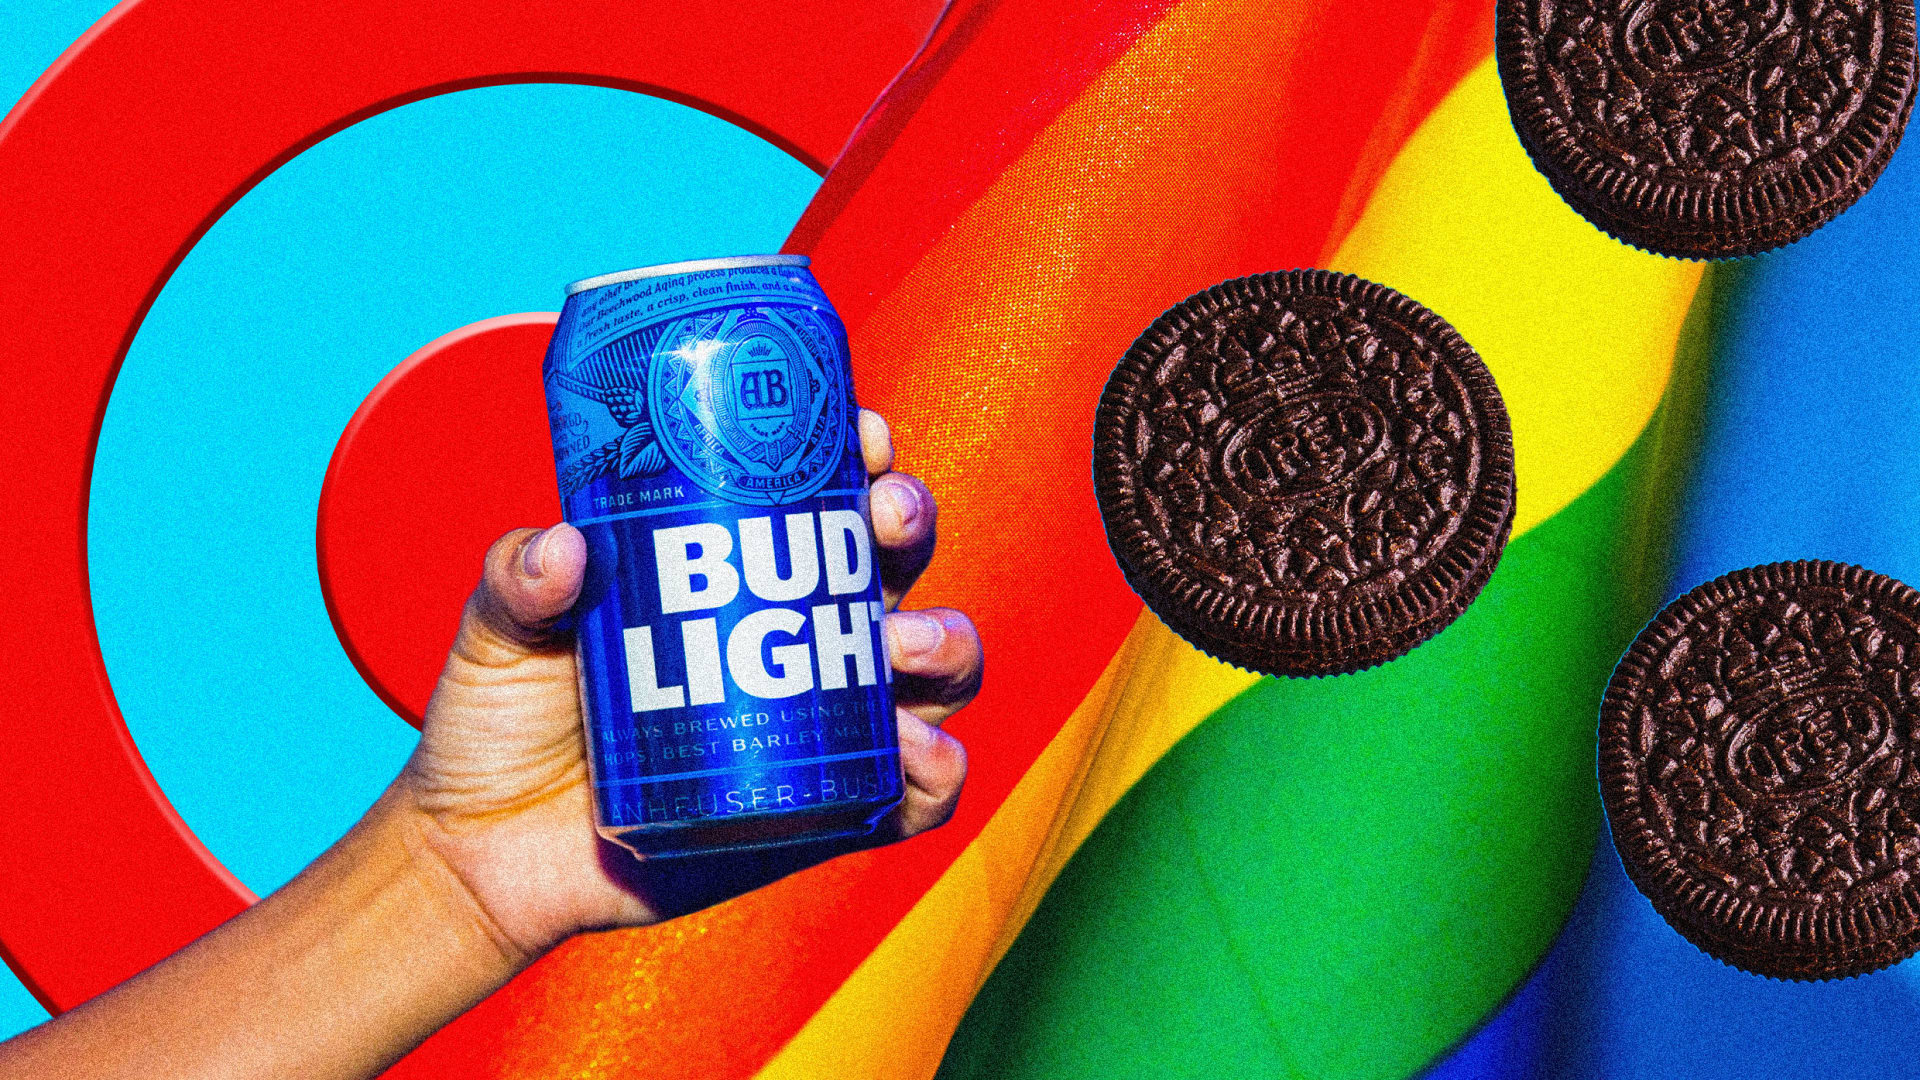 June is Pride month, but for brands it’s “put up or shut up” time